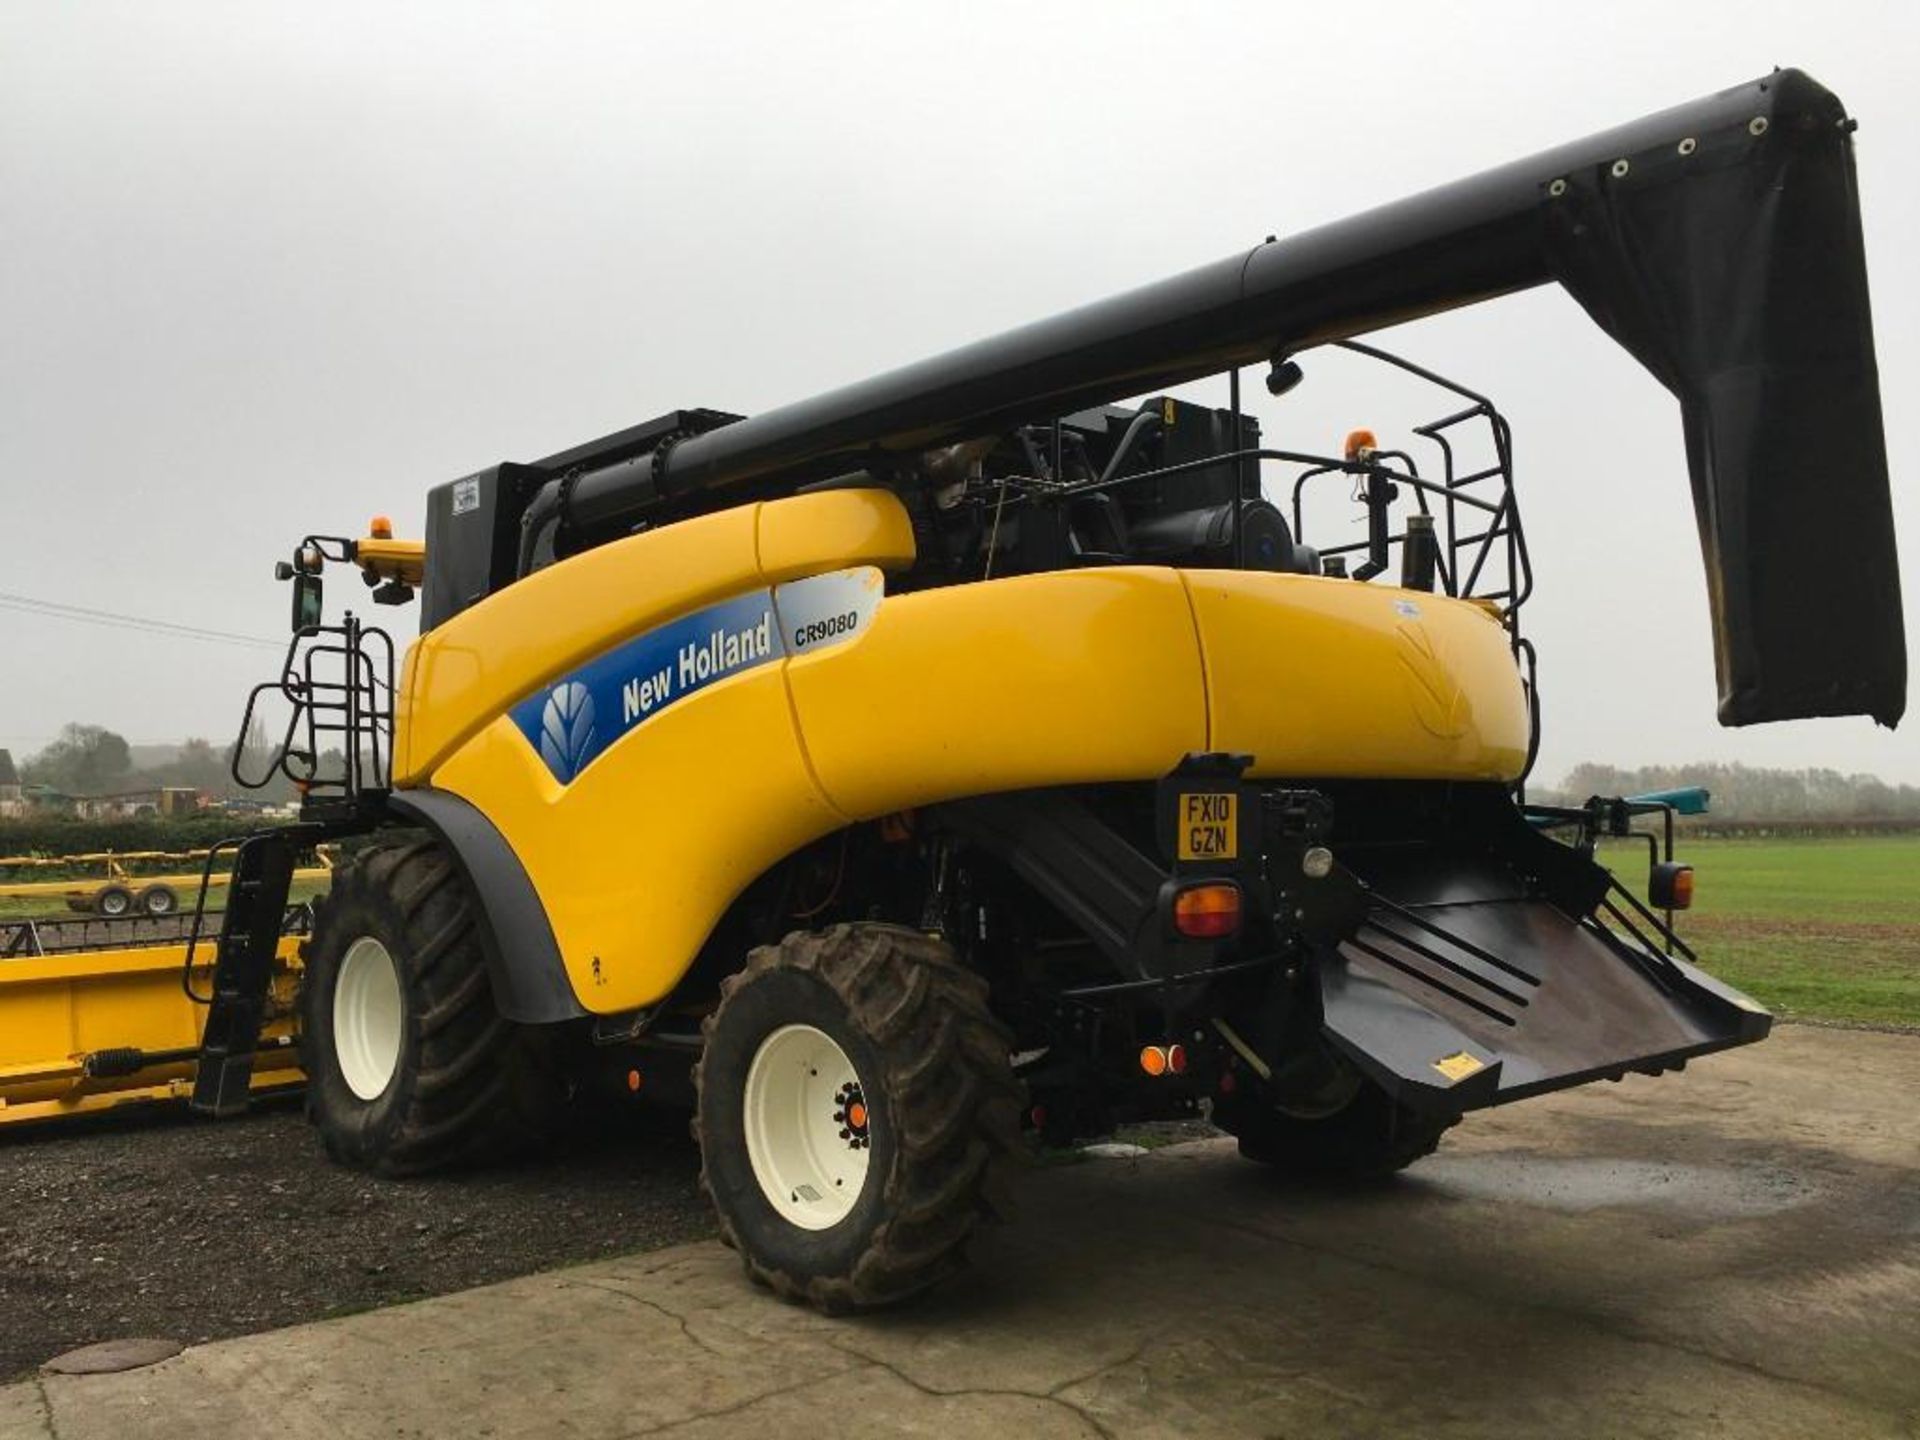 2009 New Holland CR9080 Elevation 2wd combine harvester with 30ft header and trailer, 2 electric sid - Image 4 of 10